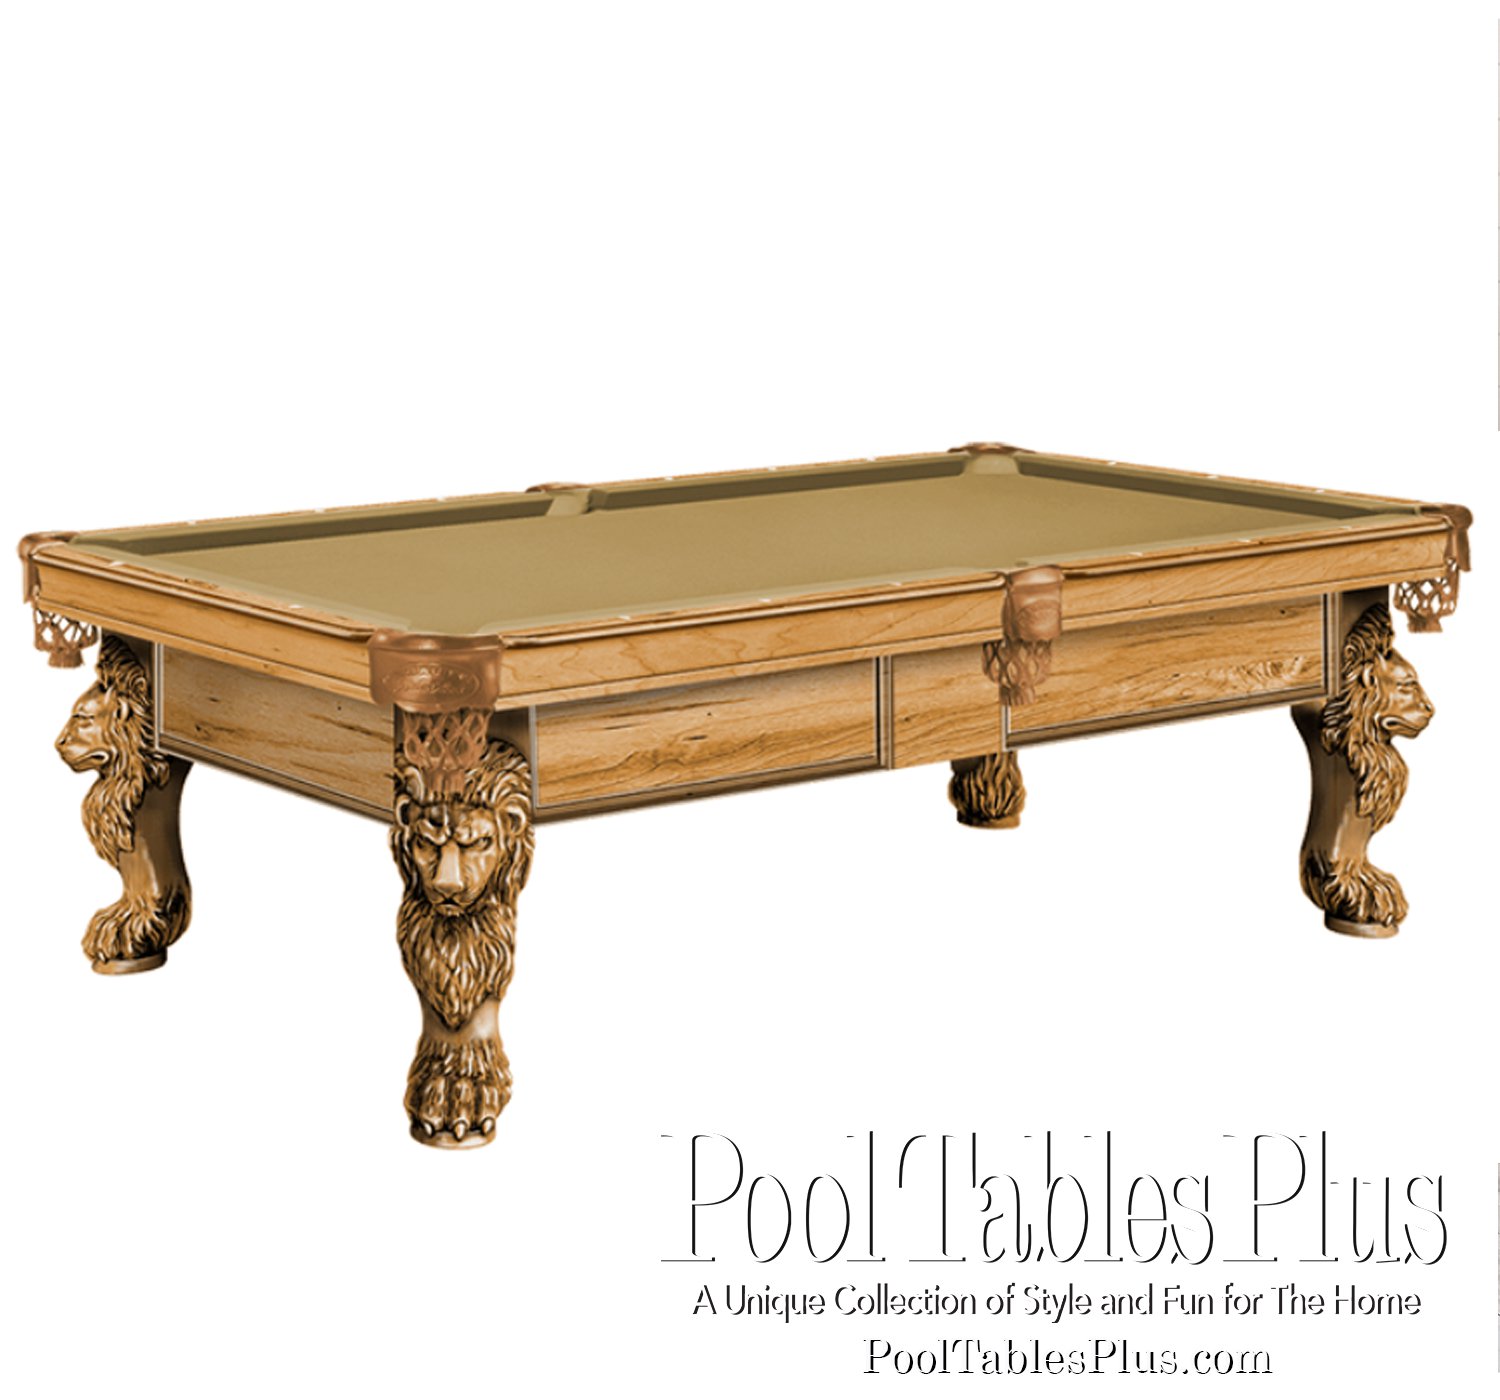 Olhausen St. George Pool Table-Shop Olhausen Pool Tables